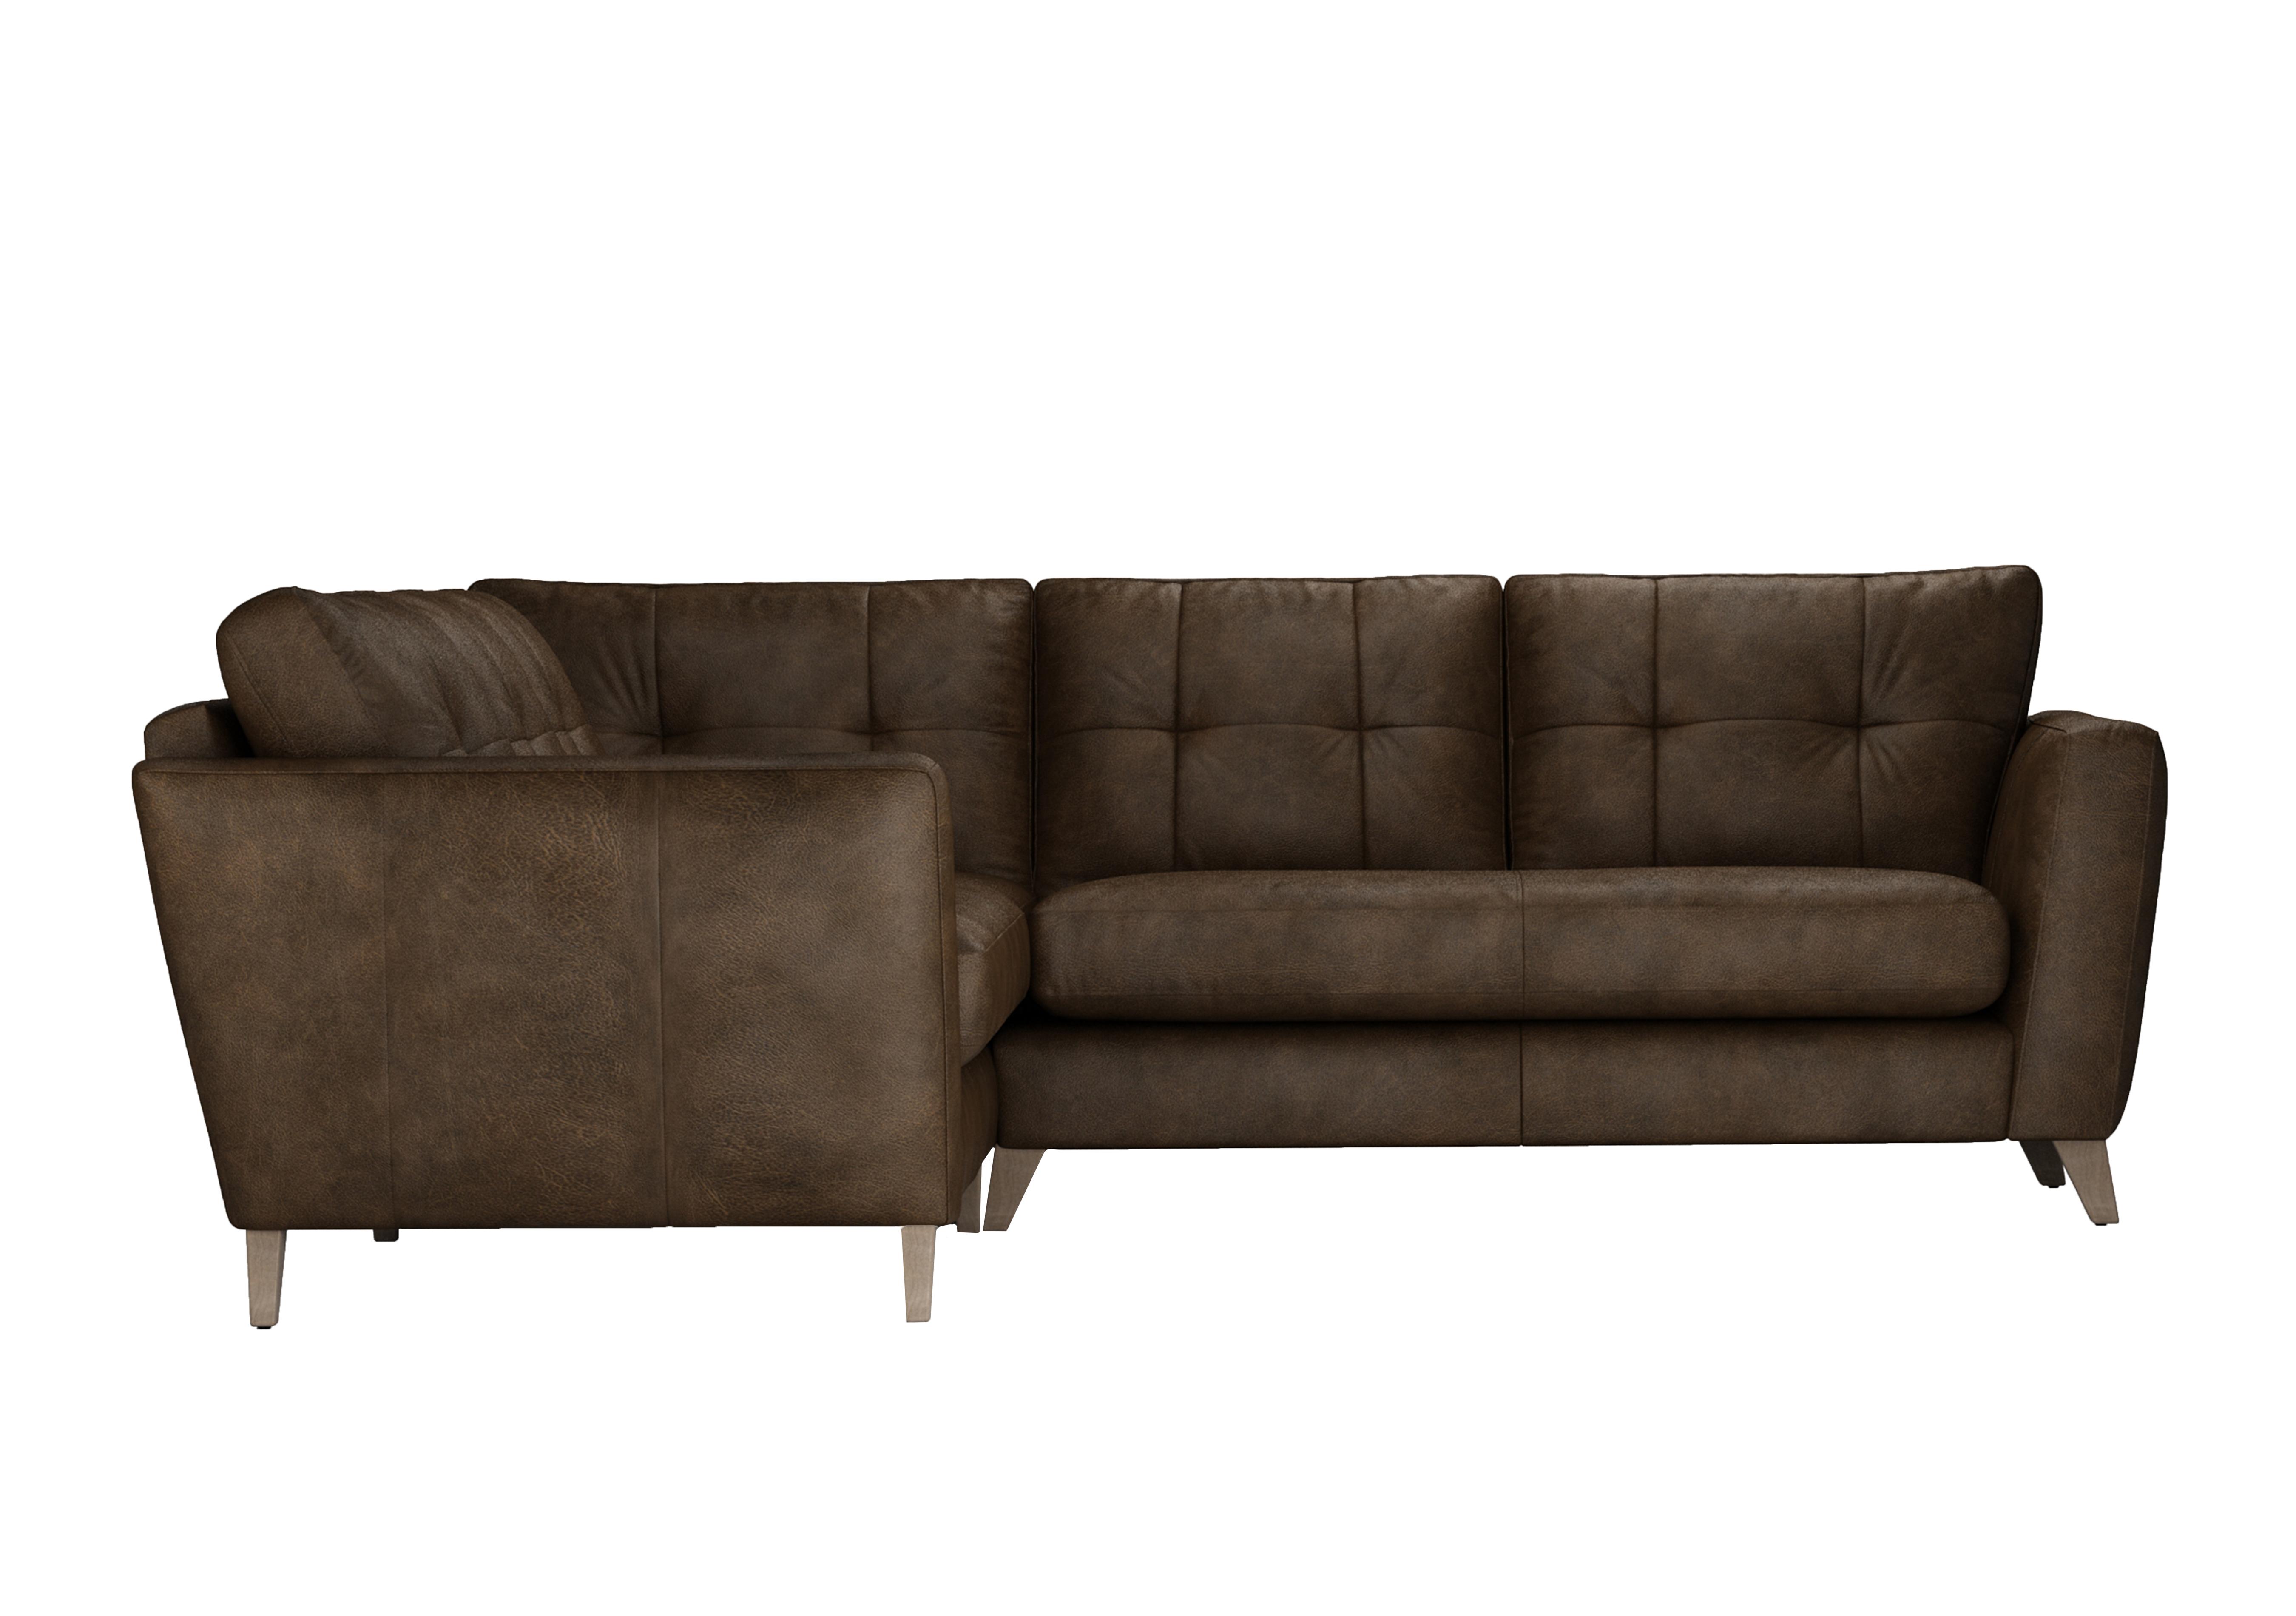 Hermione Leather Corner Sofa in Bou192 Bourbon Wo Ft on Furniture Village